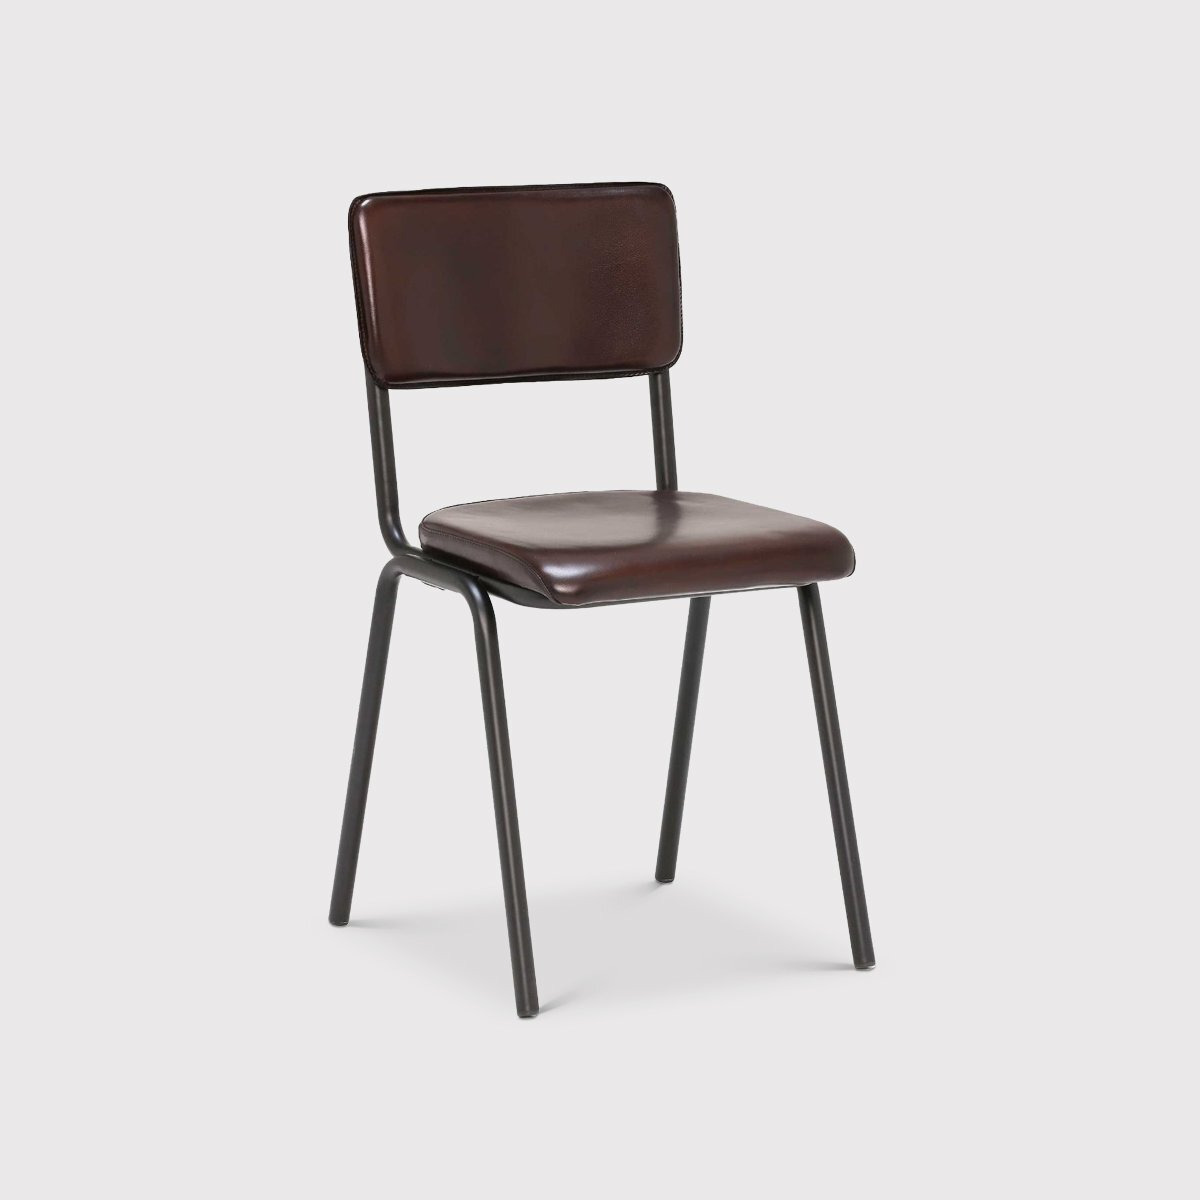 Pure Furniture Twyford Dining Chair, Brown Leather - Barker & Stonehouse - image 1